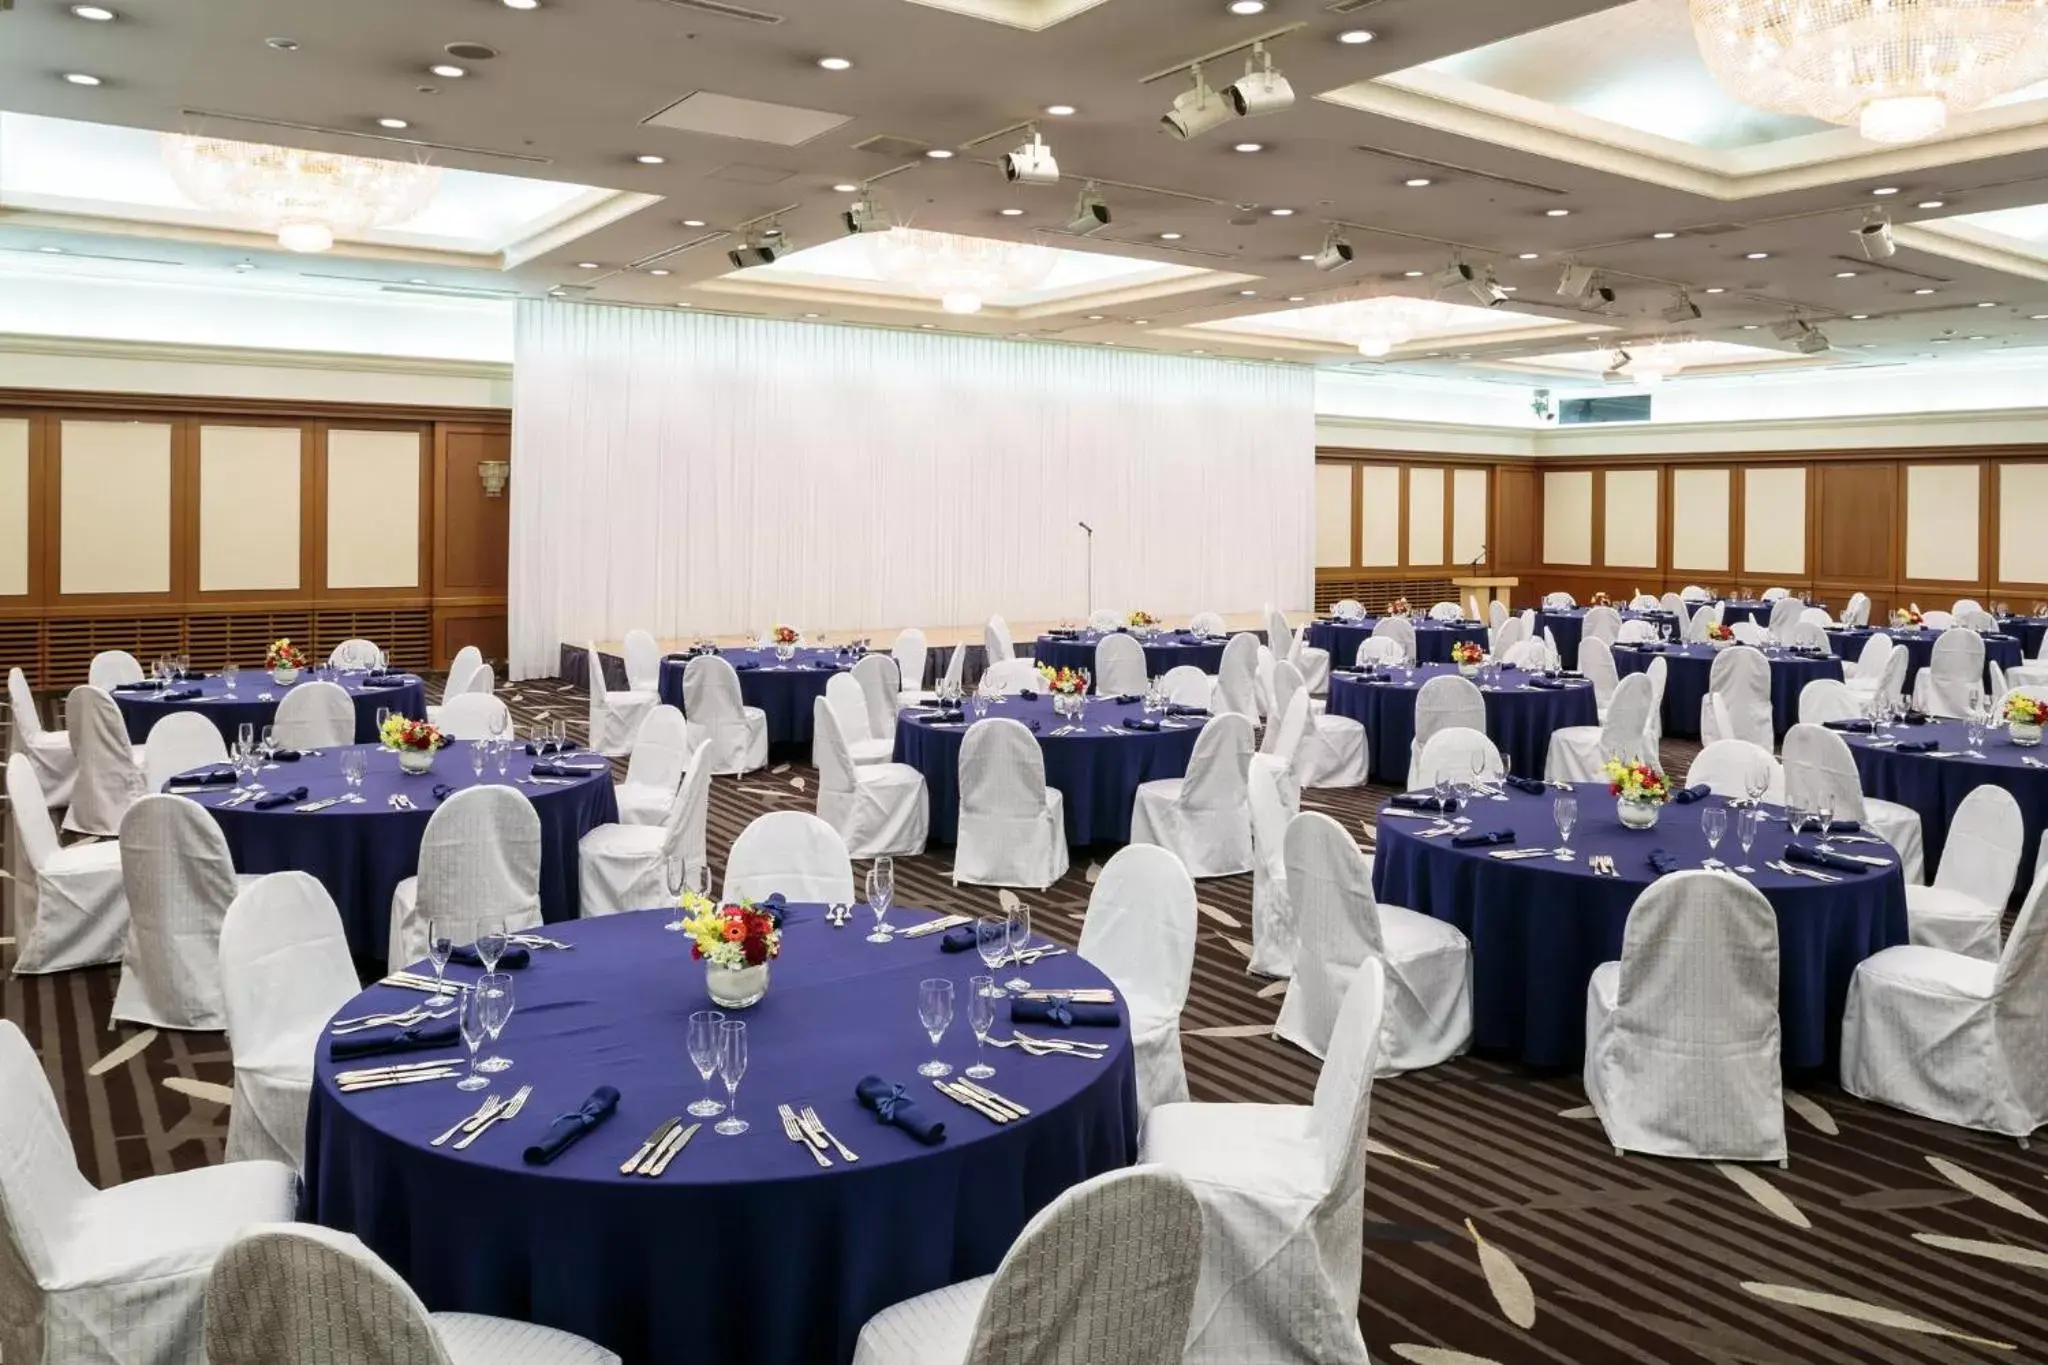 Banquet/Function facilities, Banquet Facilities in ANA Crowne Plaza Sapporo, an IHG Hotel